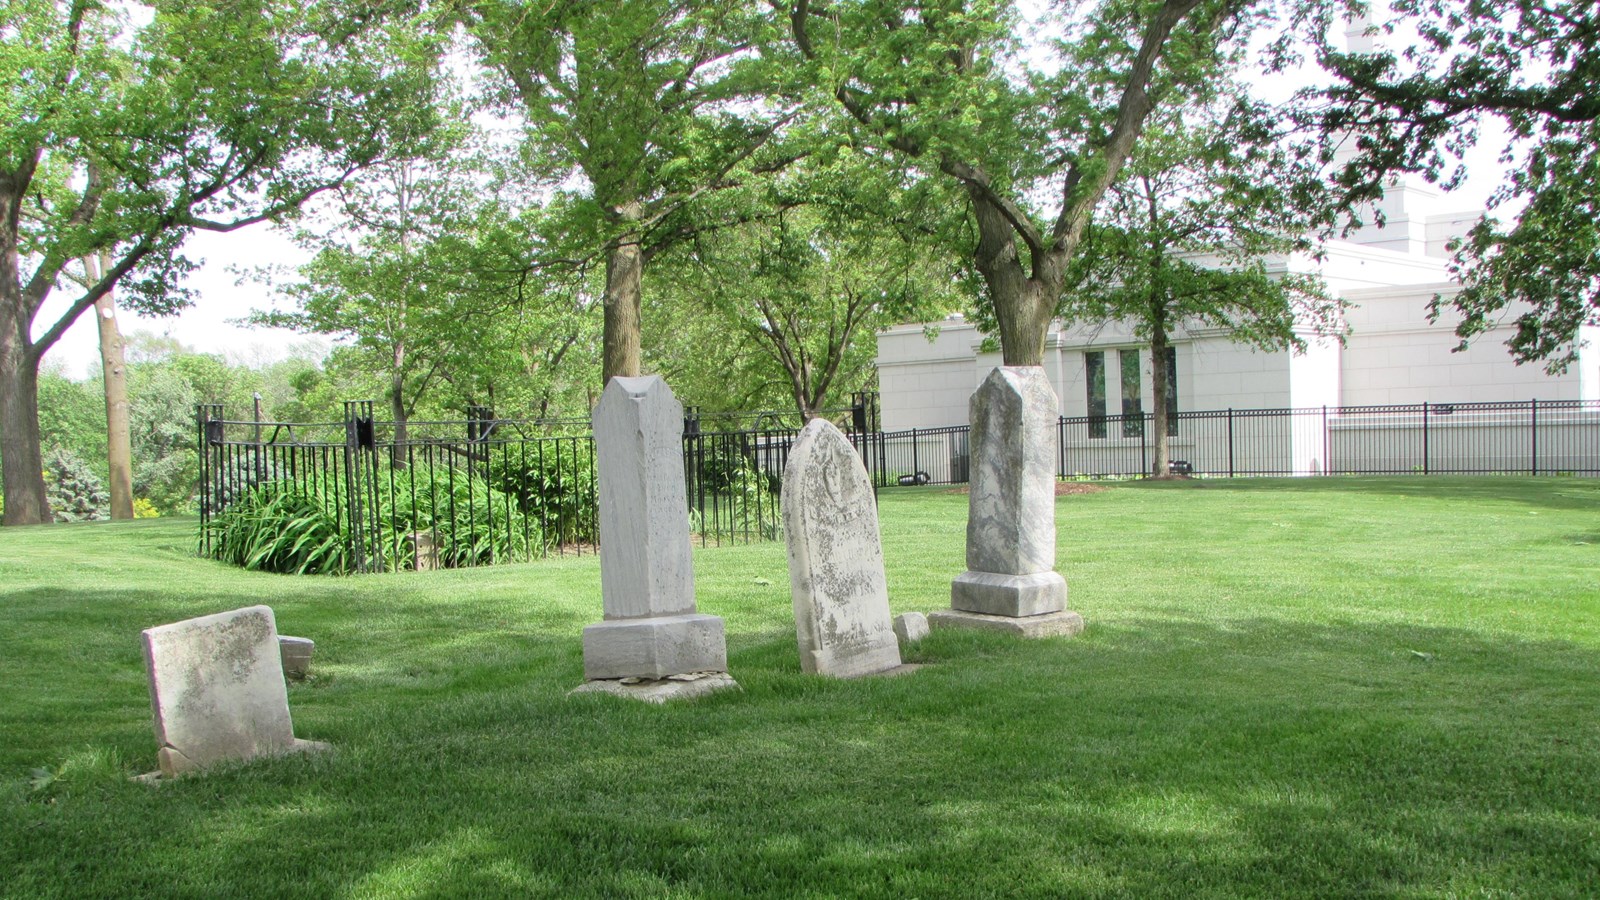 Row of four headstones in treed cemetery, well maintained lawn. Mormon Center building in background